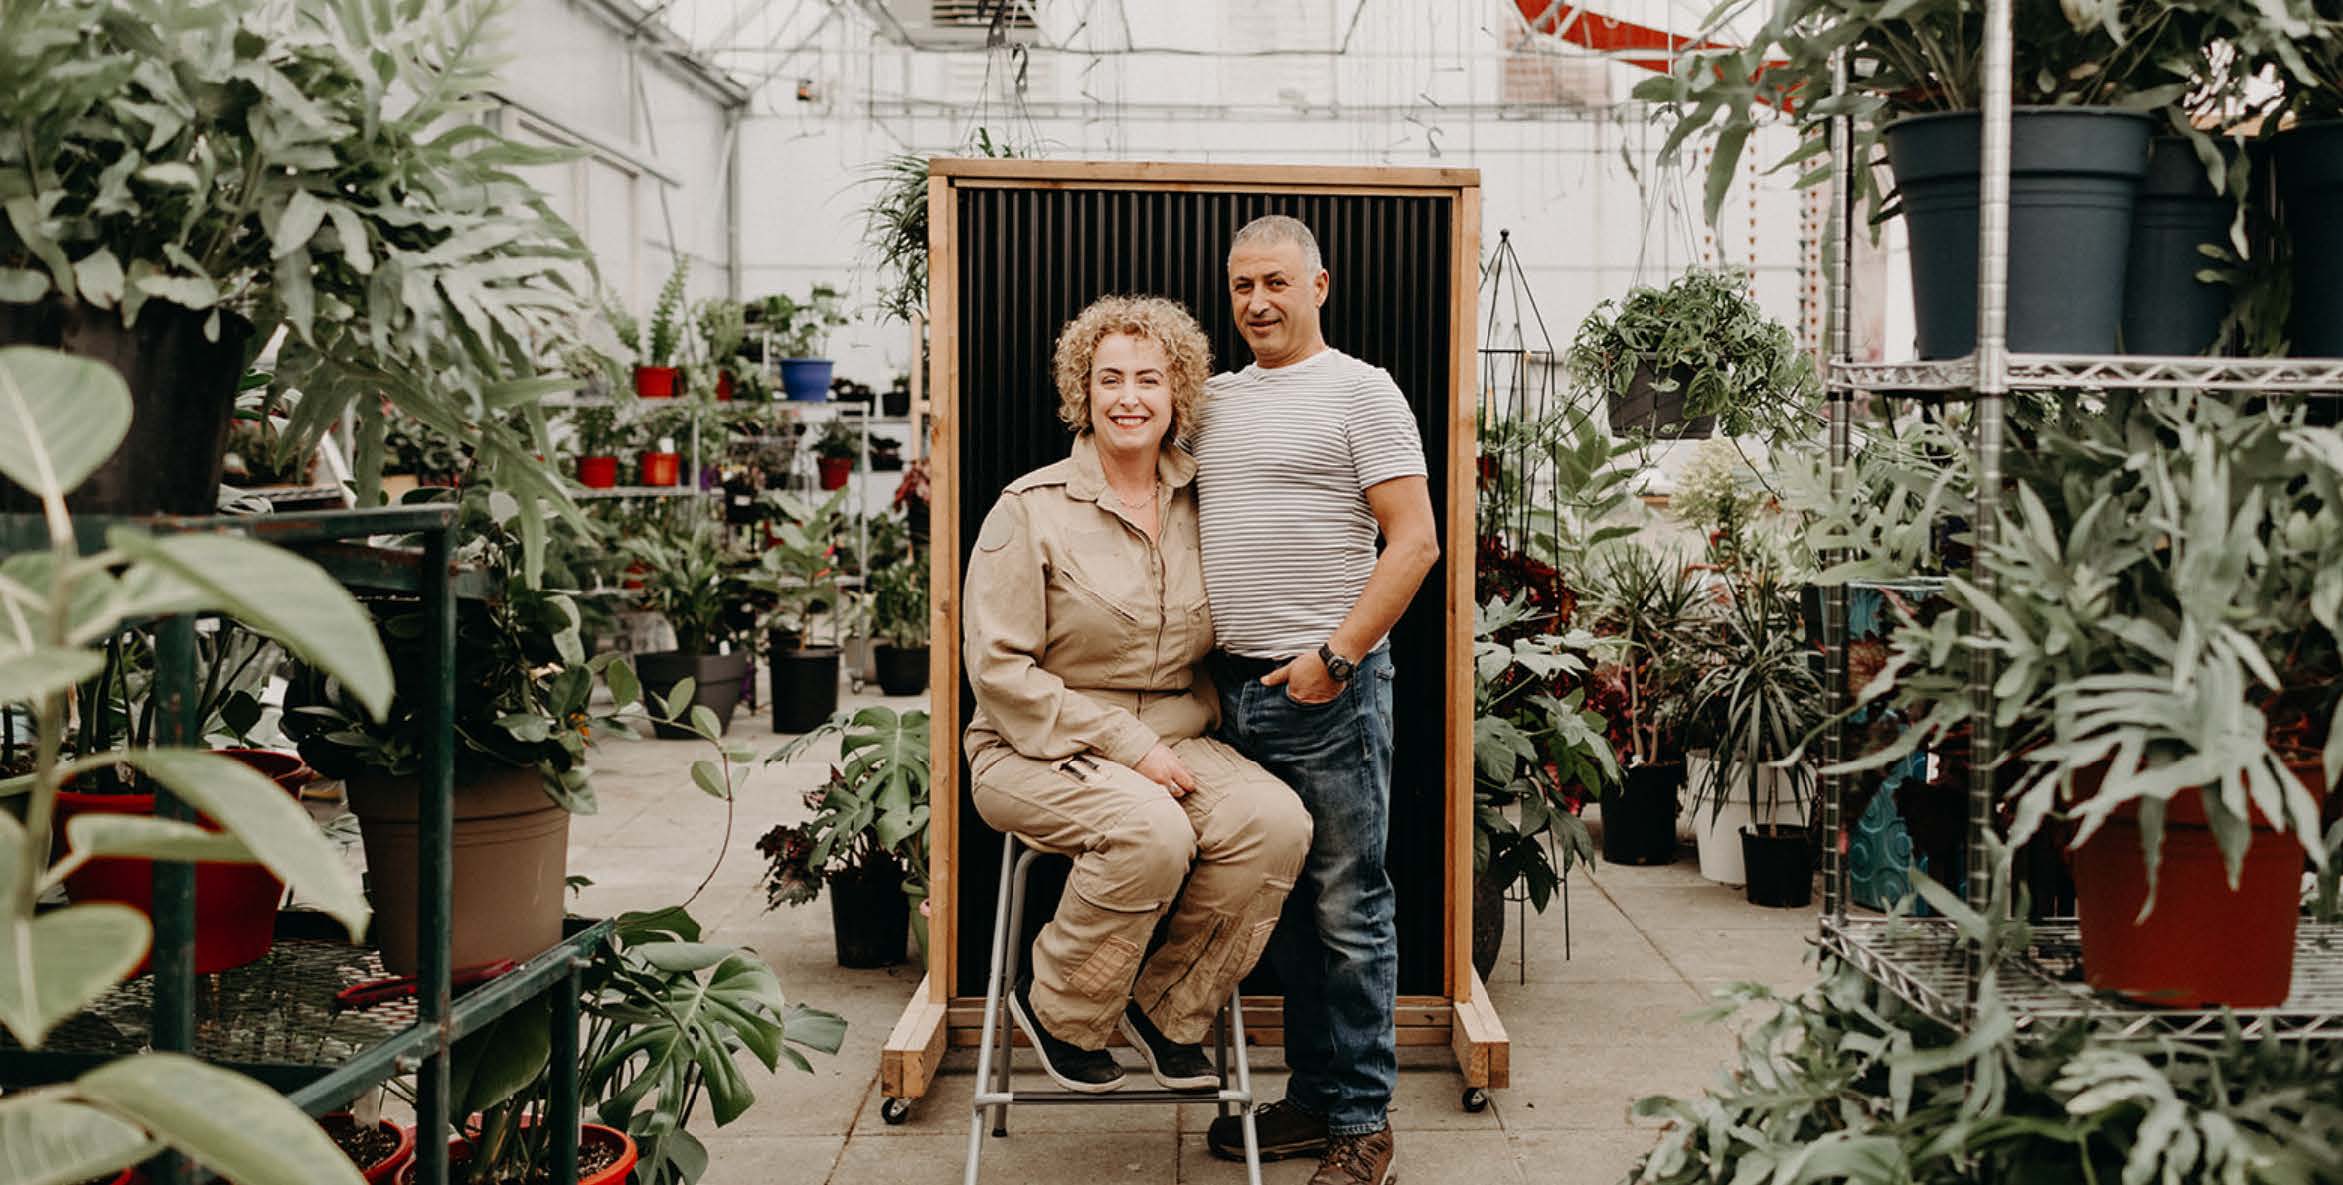 Kelly and Eko, the owners of Down to Earth Landscaping, sitting in the nursery